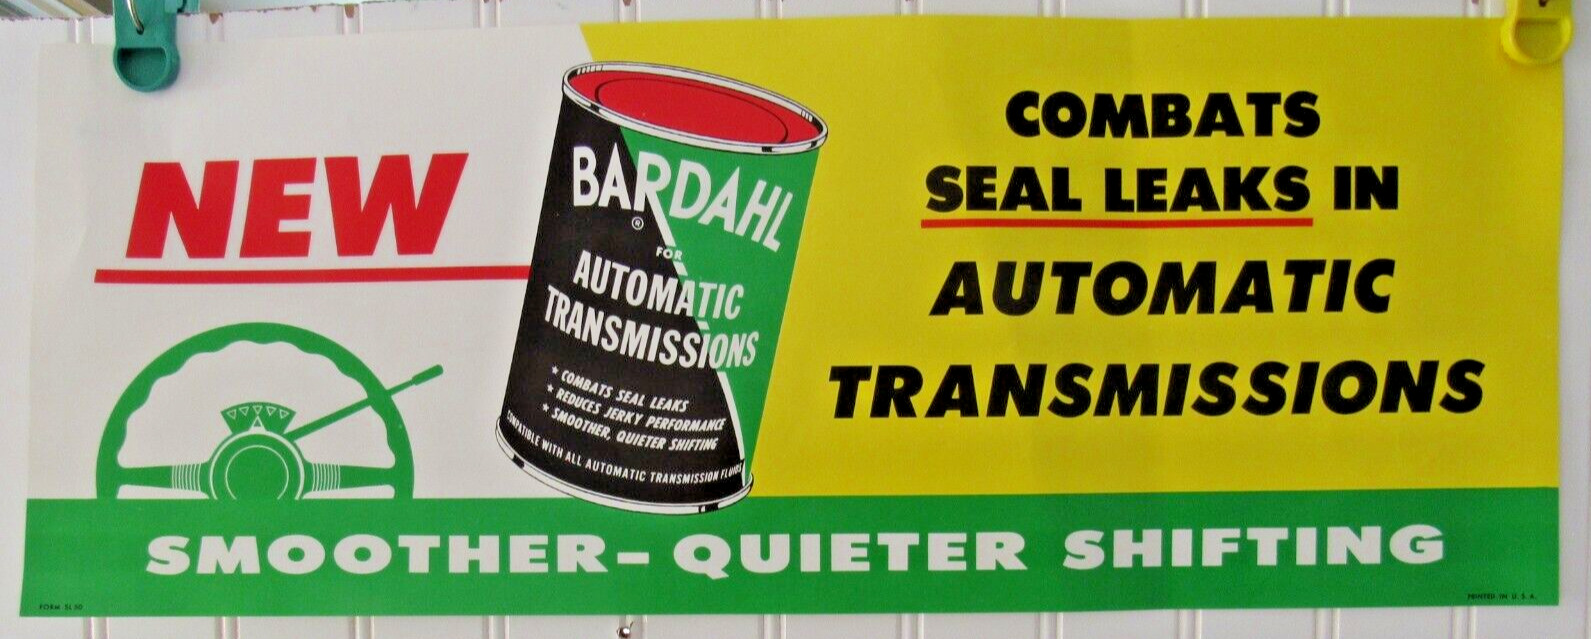 Vintage BARDAHL Combats Seal Leaks In Automatic Transmissions Wall- Window Sign